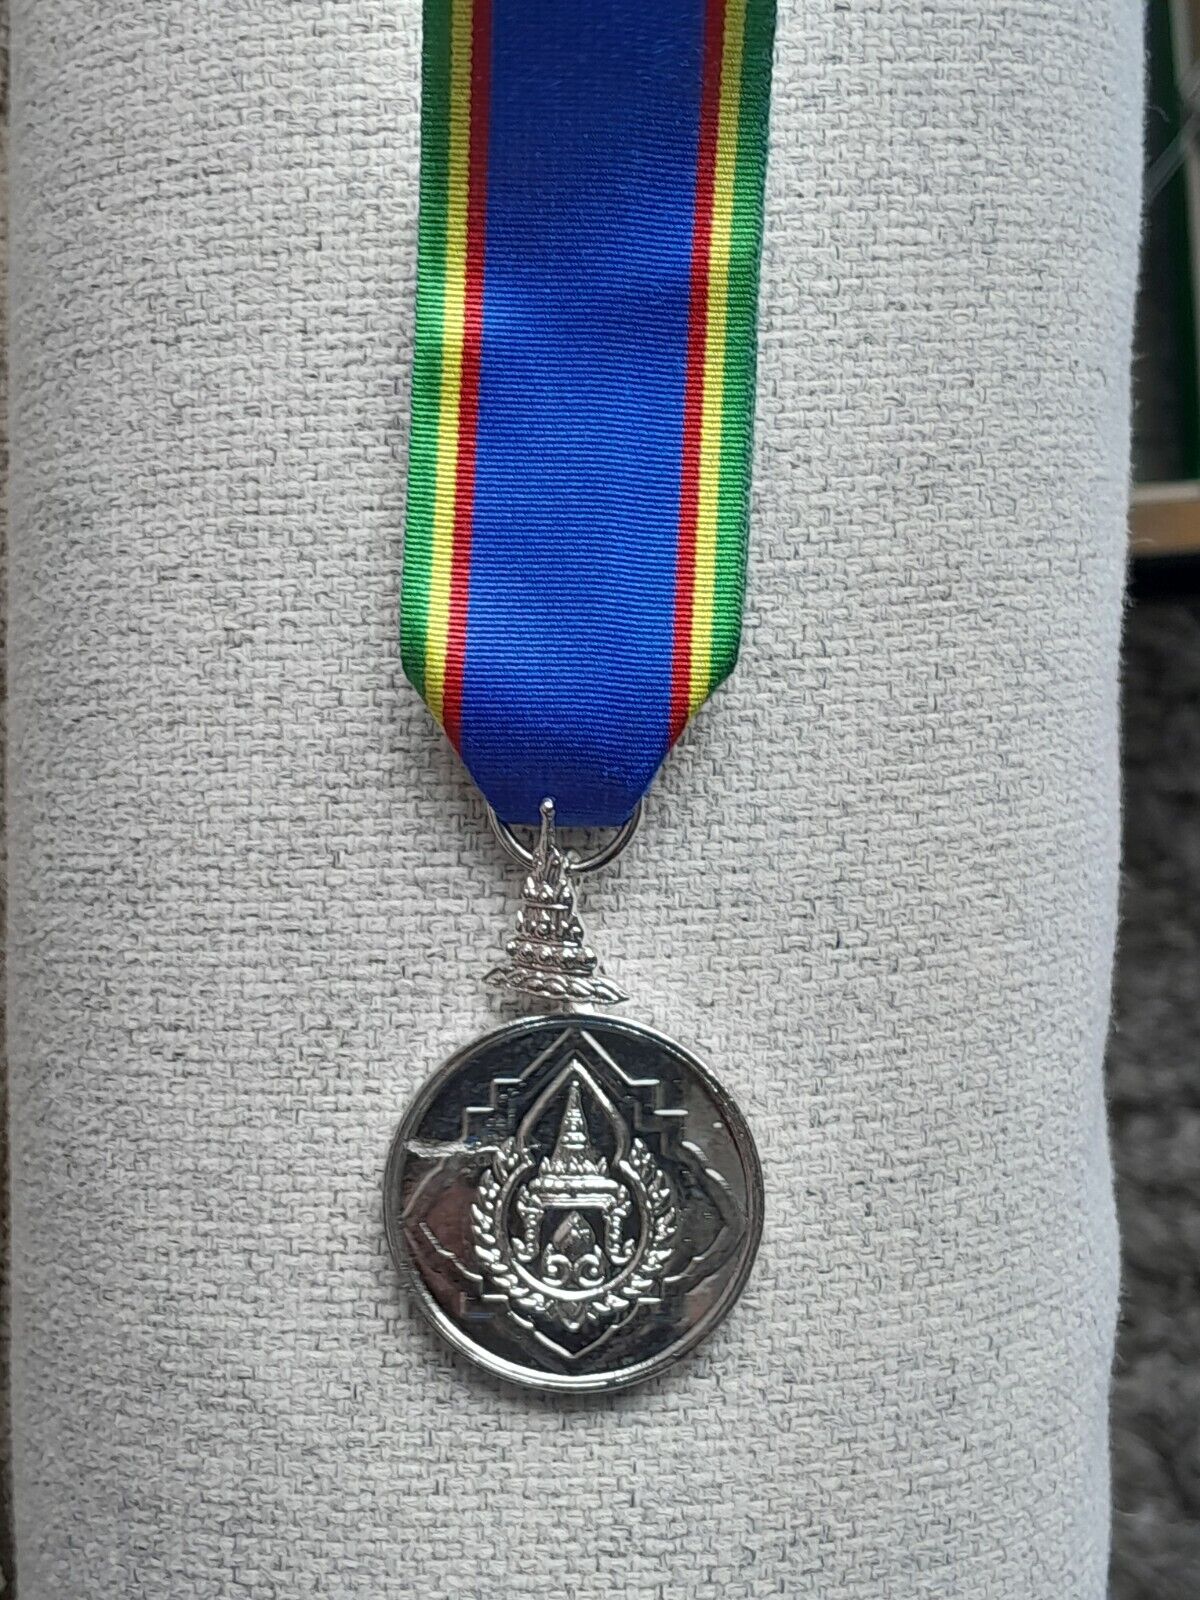 THAILAND ORDER OF THE CROWN OF THAILAND-7TH CLASS, MEMBER, SILVER MEDAL